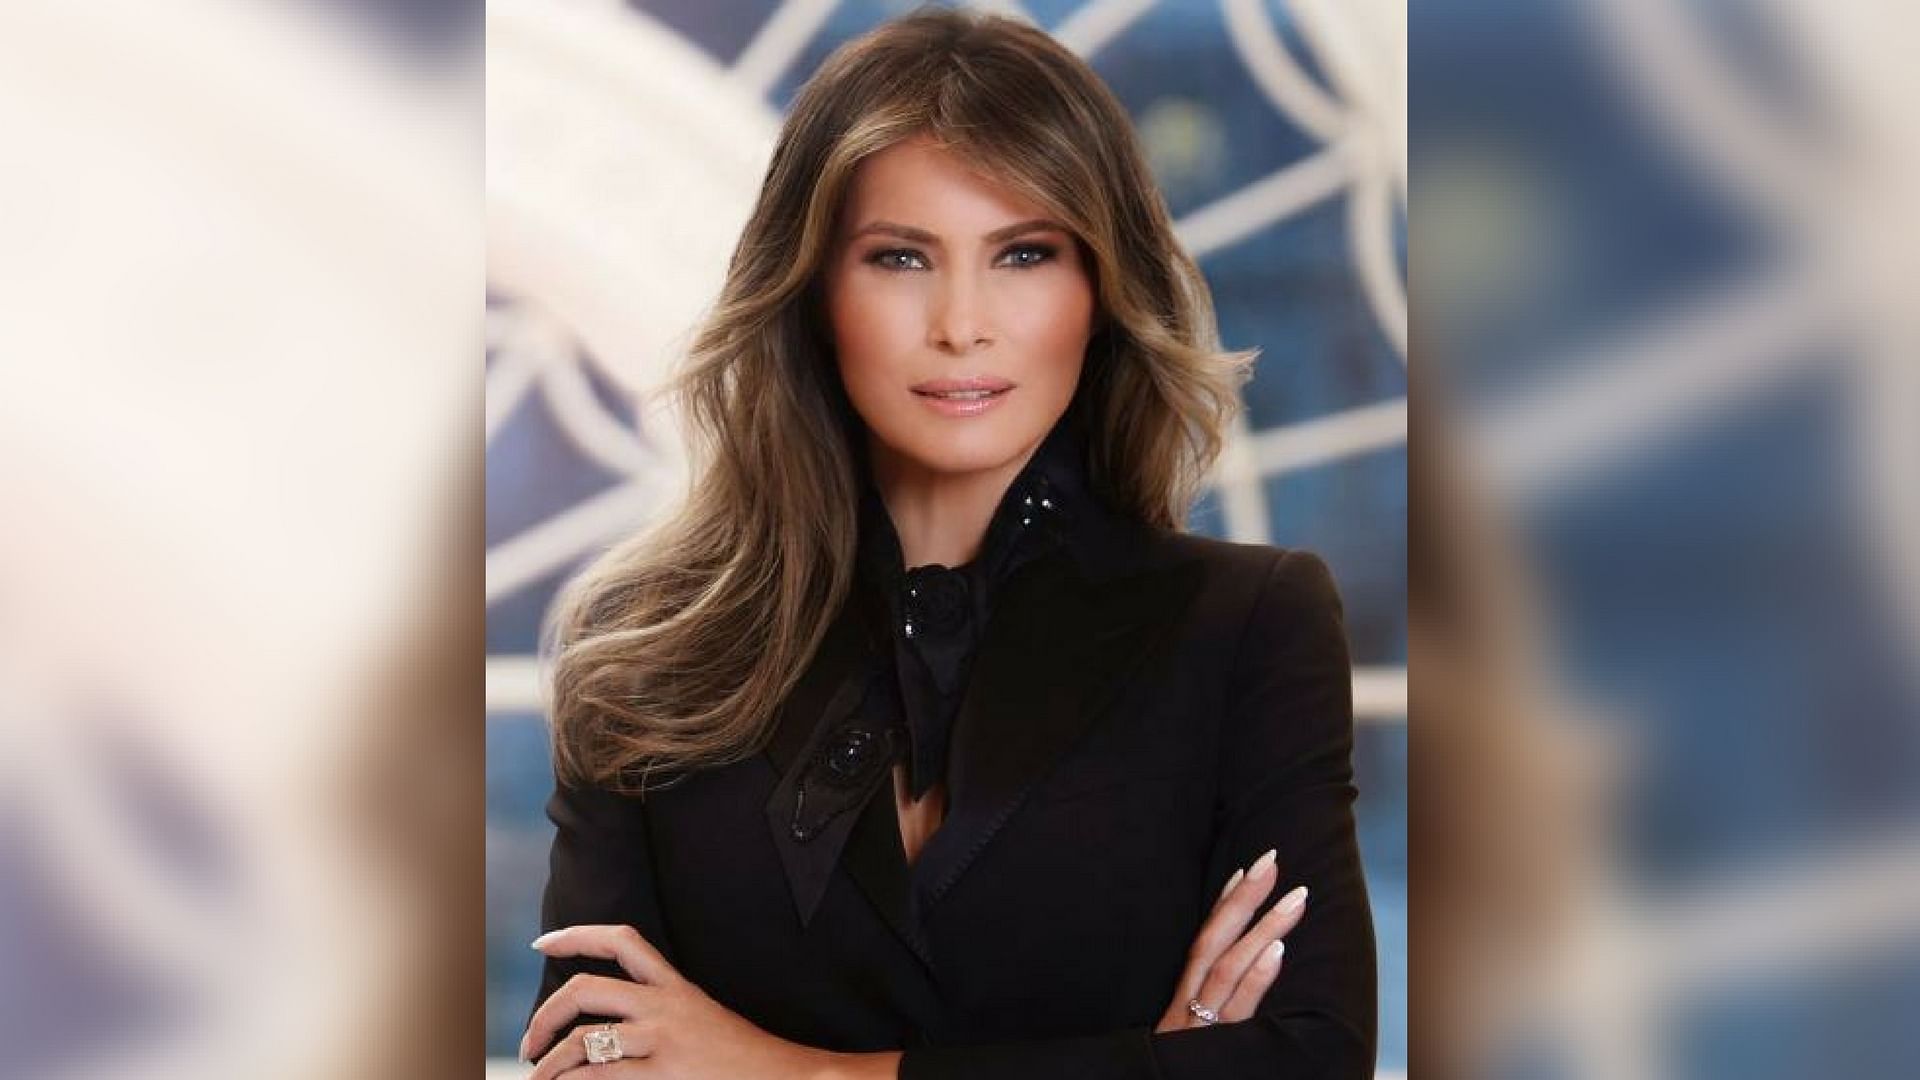 

The White House released First Lady Melania Trump’s official portrait on Monday. (Photo altered by <b>The Quint</b>)